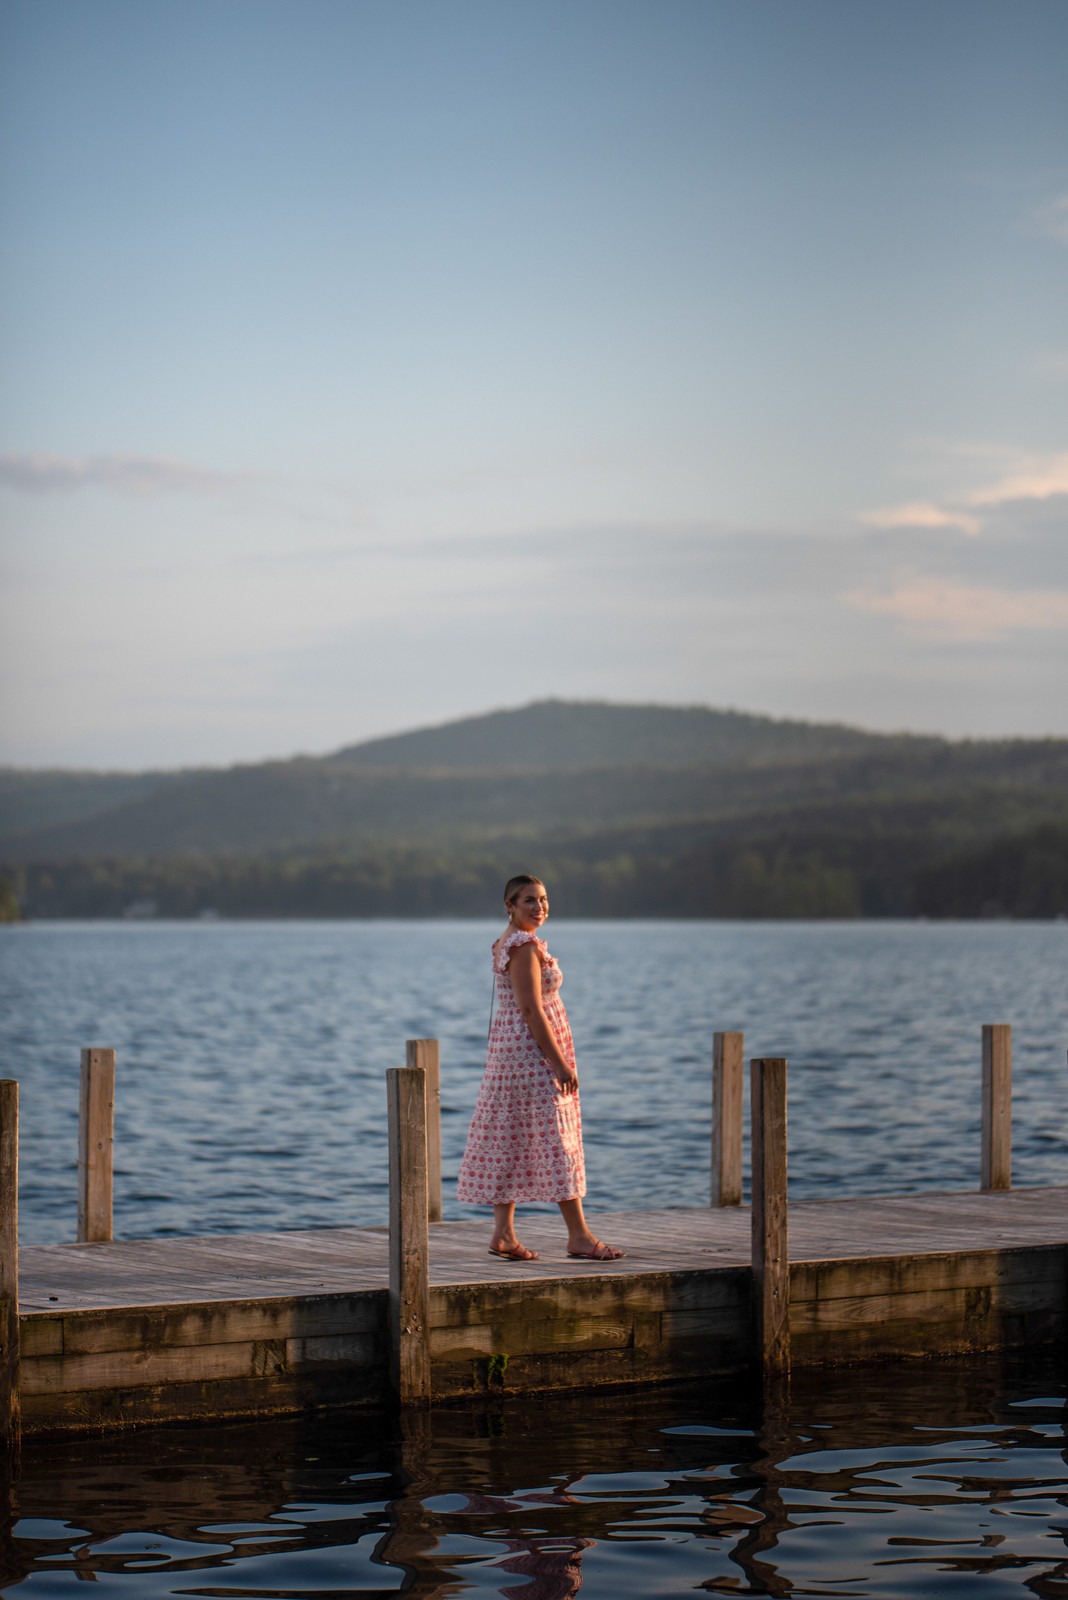 Sunset on Lake George, NY | New England Road Trip Itinerary - New England Road Trip - The Ultimate 7 Day Itinerary - The Perfect Summer New England Road Trip Itinerary